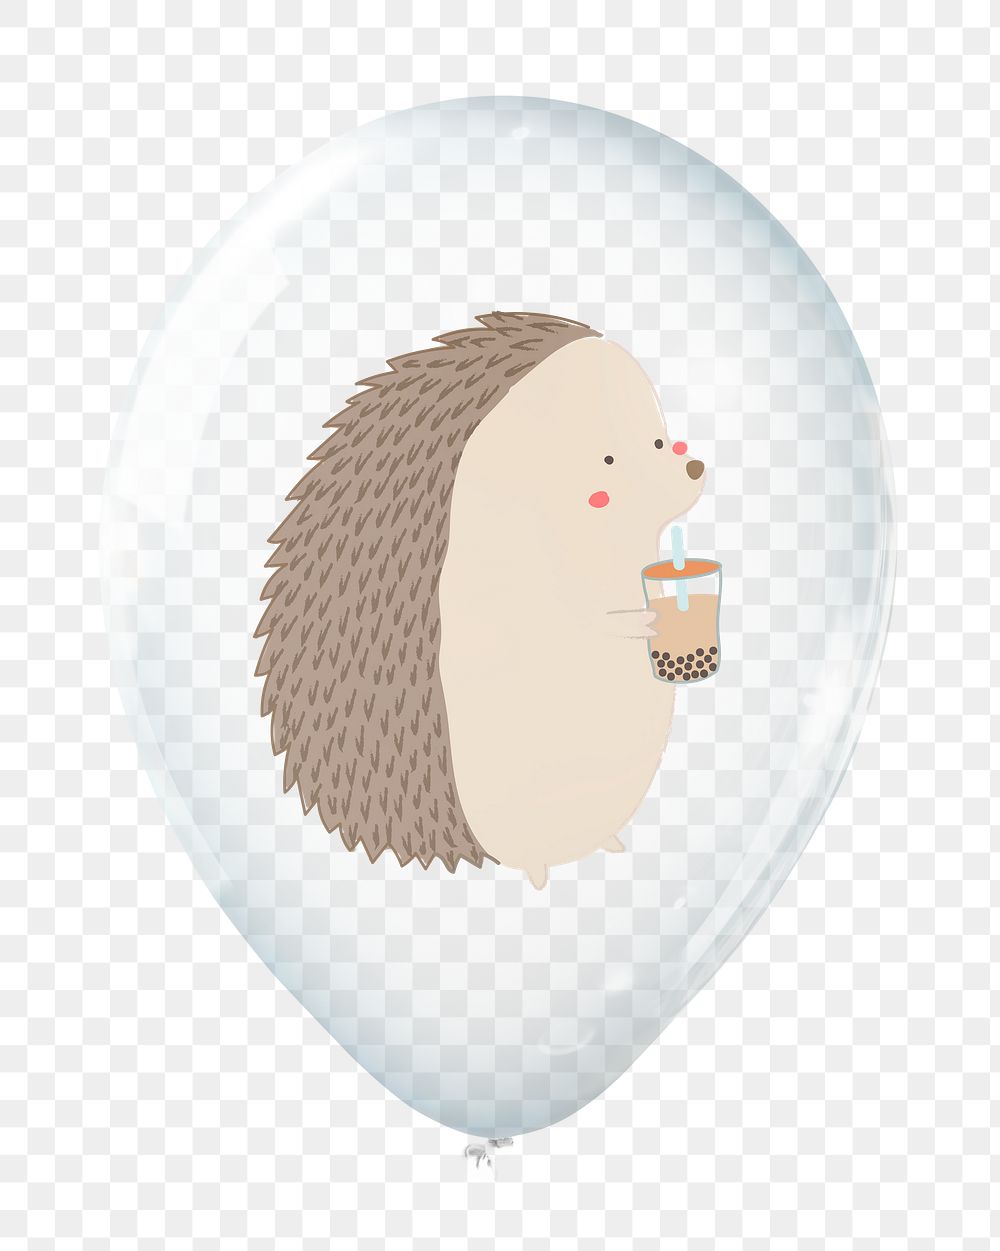 Hedgehog png sticker, cute animal in clear balloon, transparent background